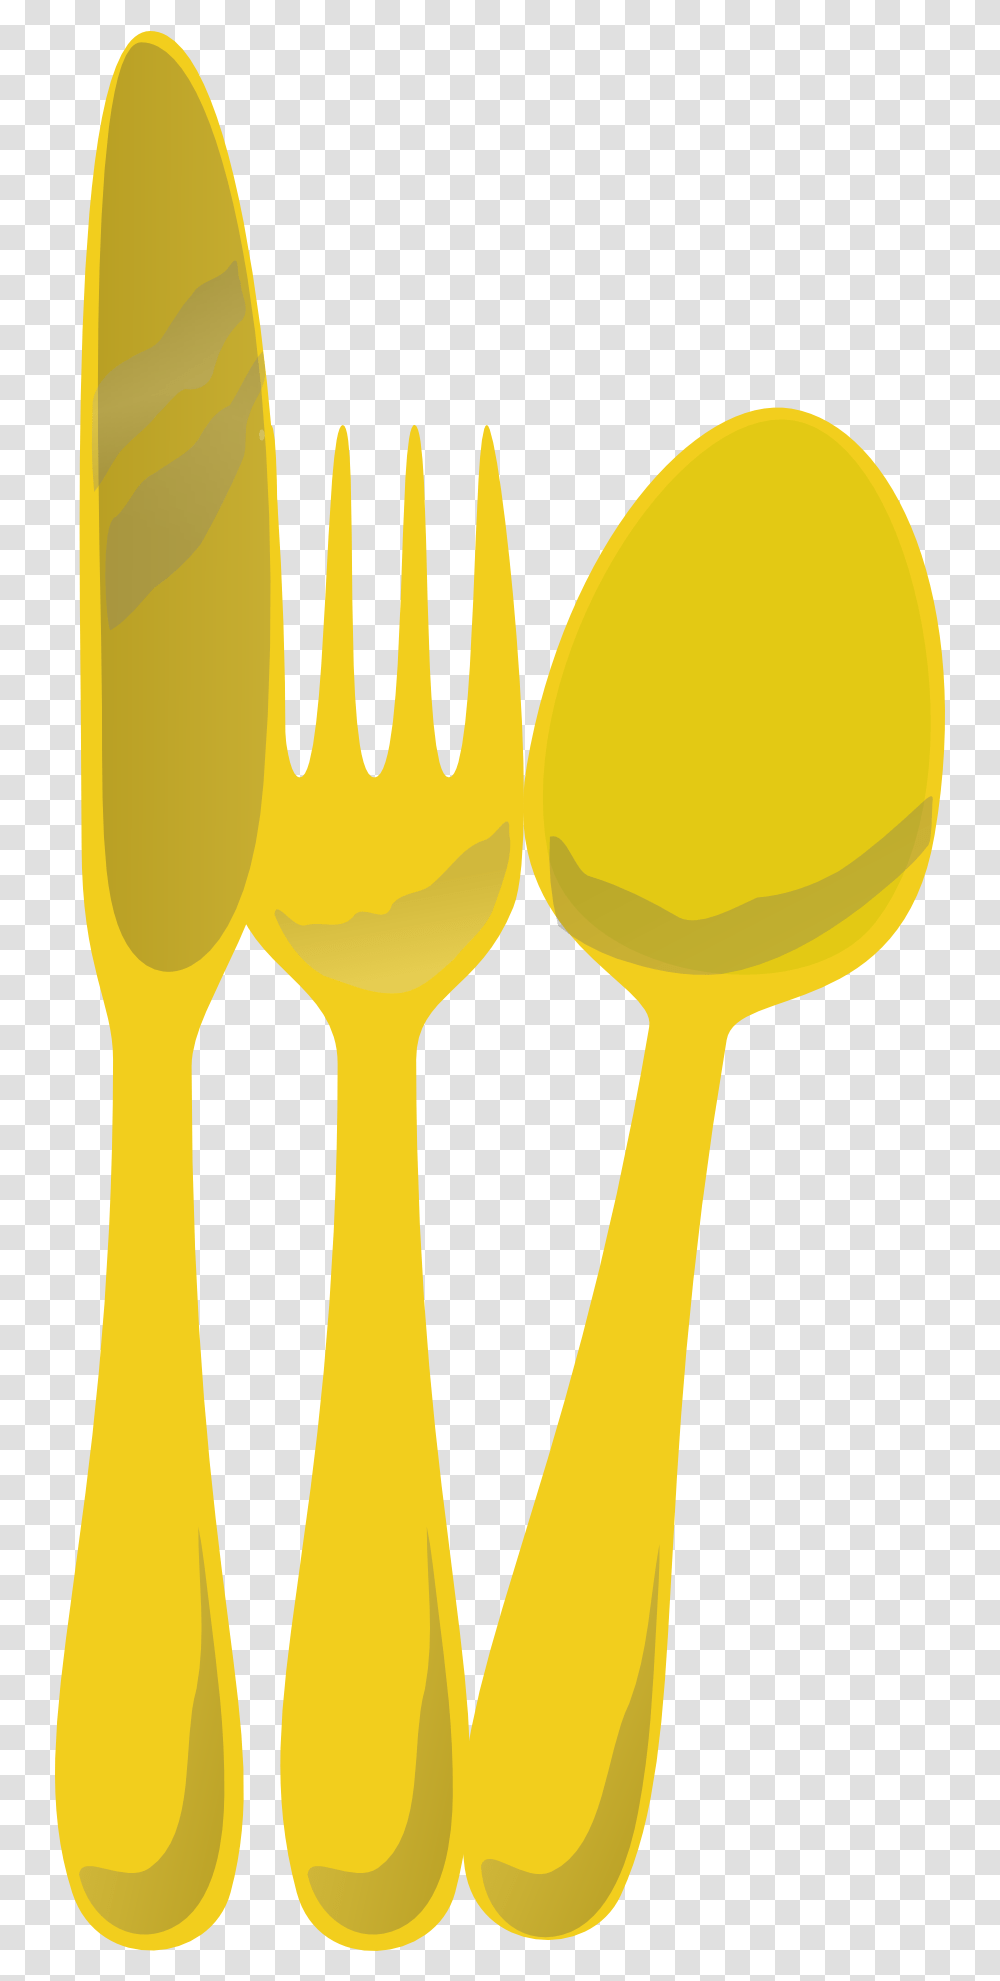 Plastic Spoon And Fork Clipart, Cutlery Transparent Png